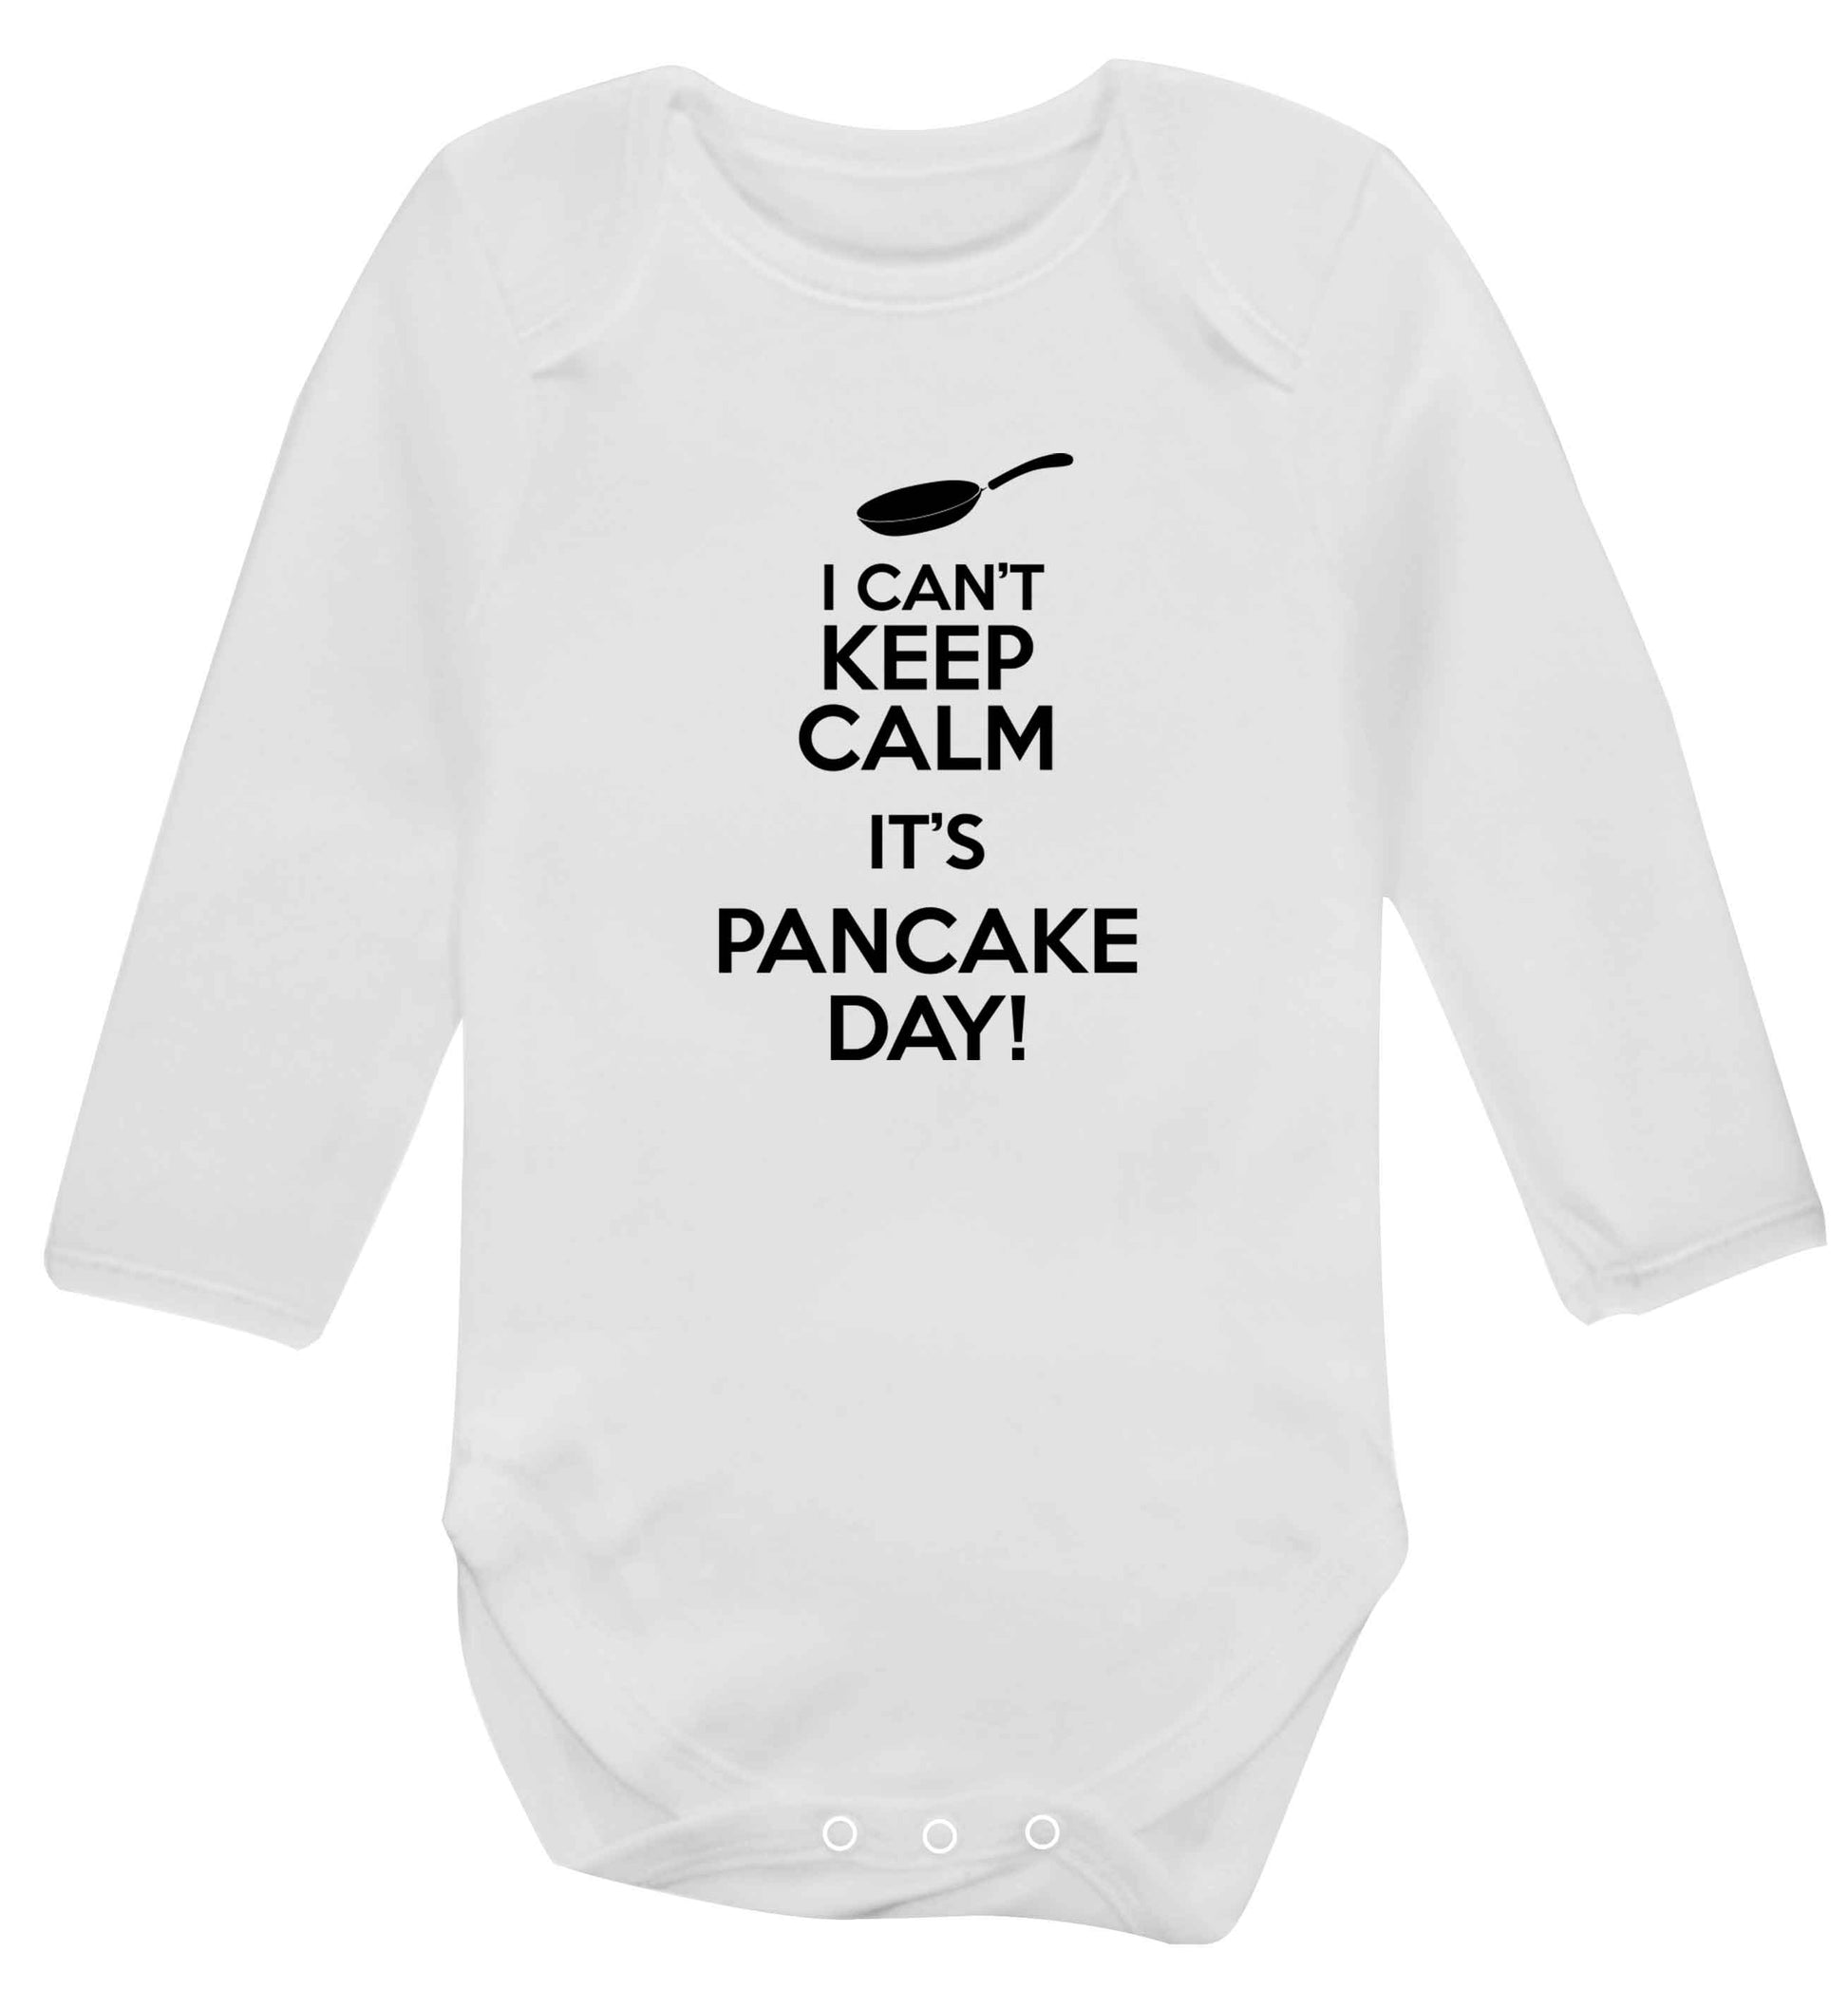 I can't keep calm it's pancake day! baby vest long sleeved white 6-12 months